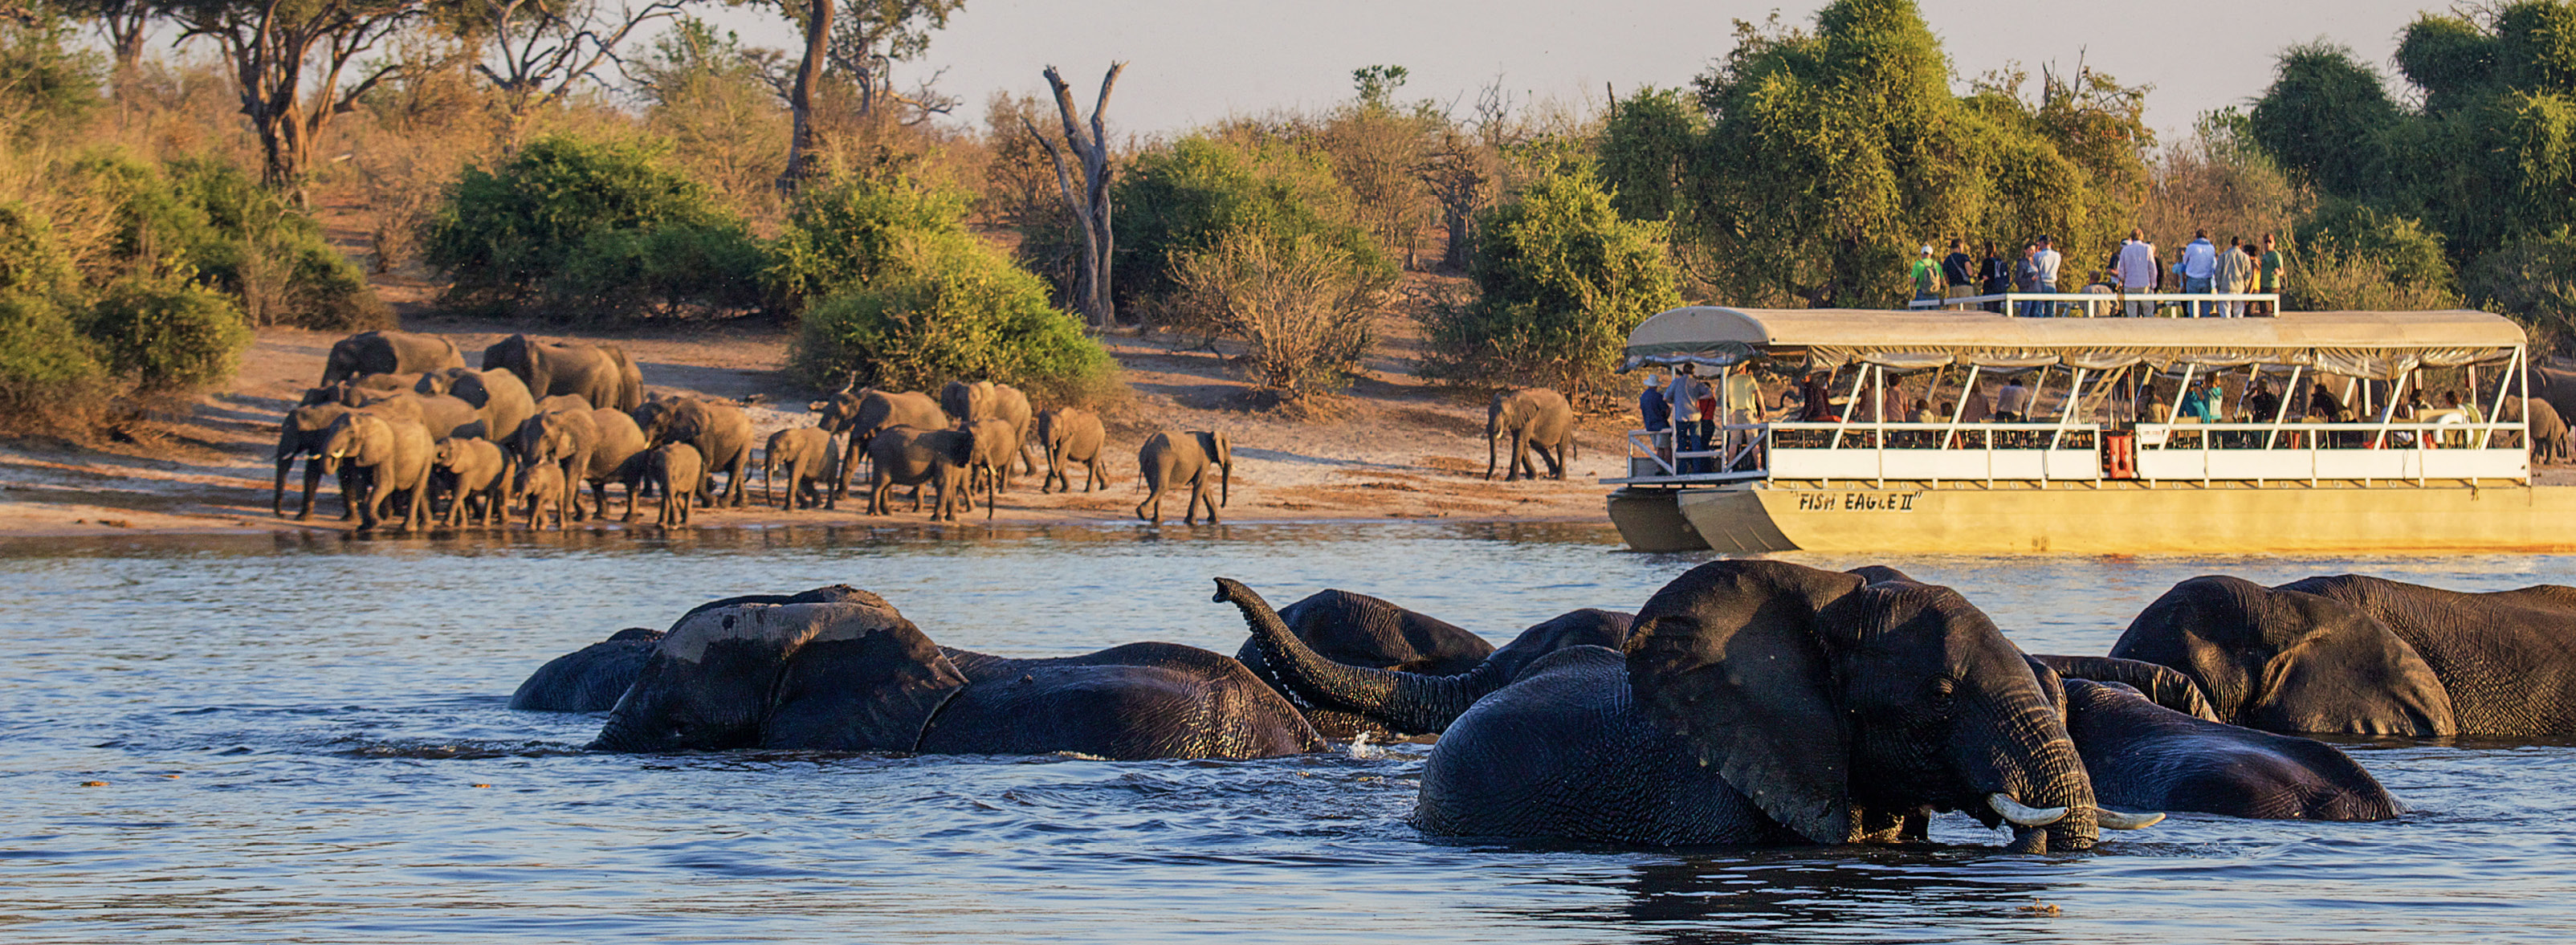 Wilderness of Southern Africa: Safari by Land & Water